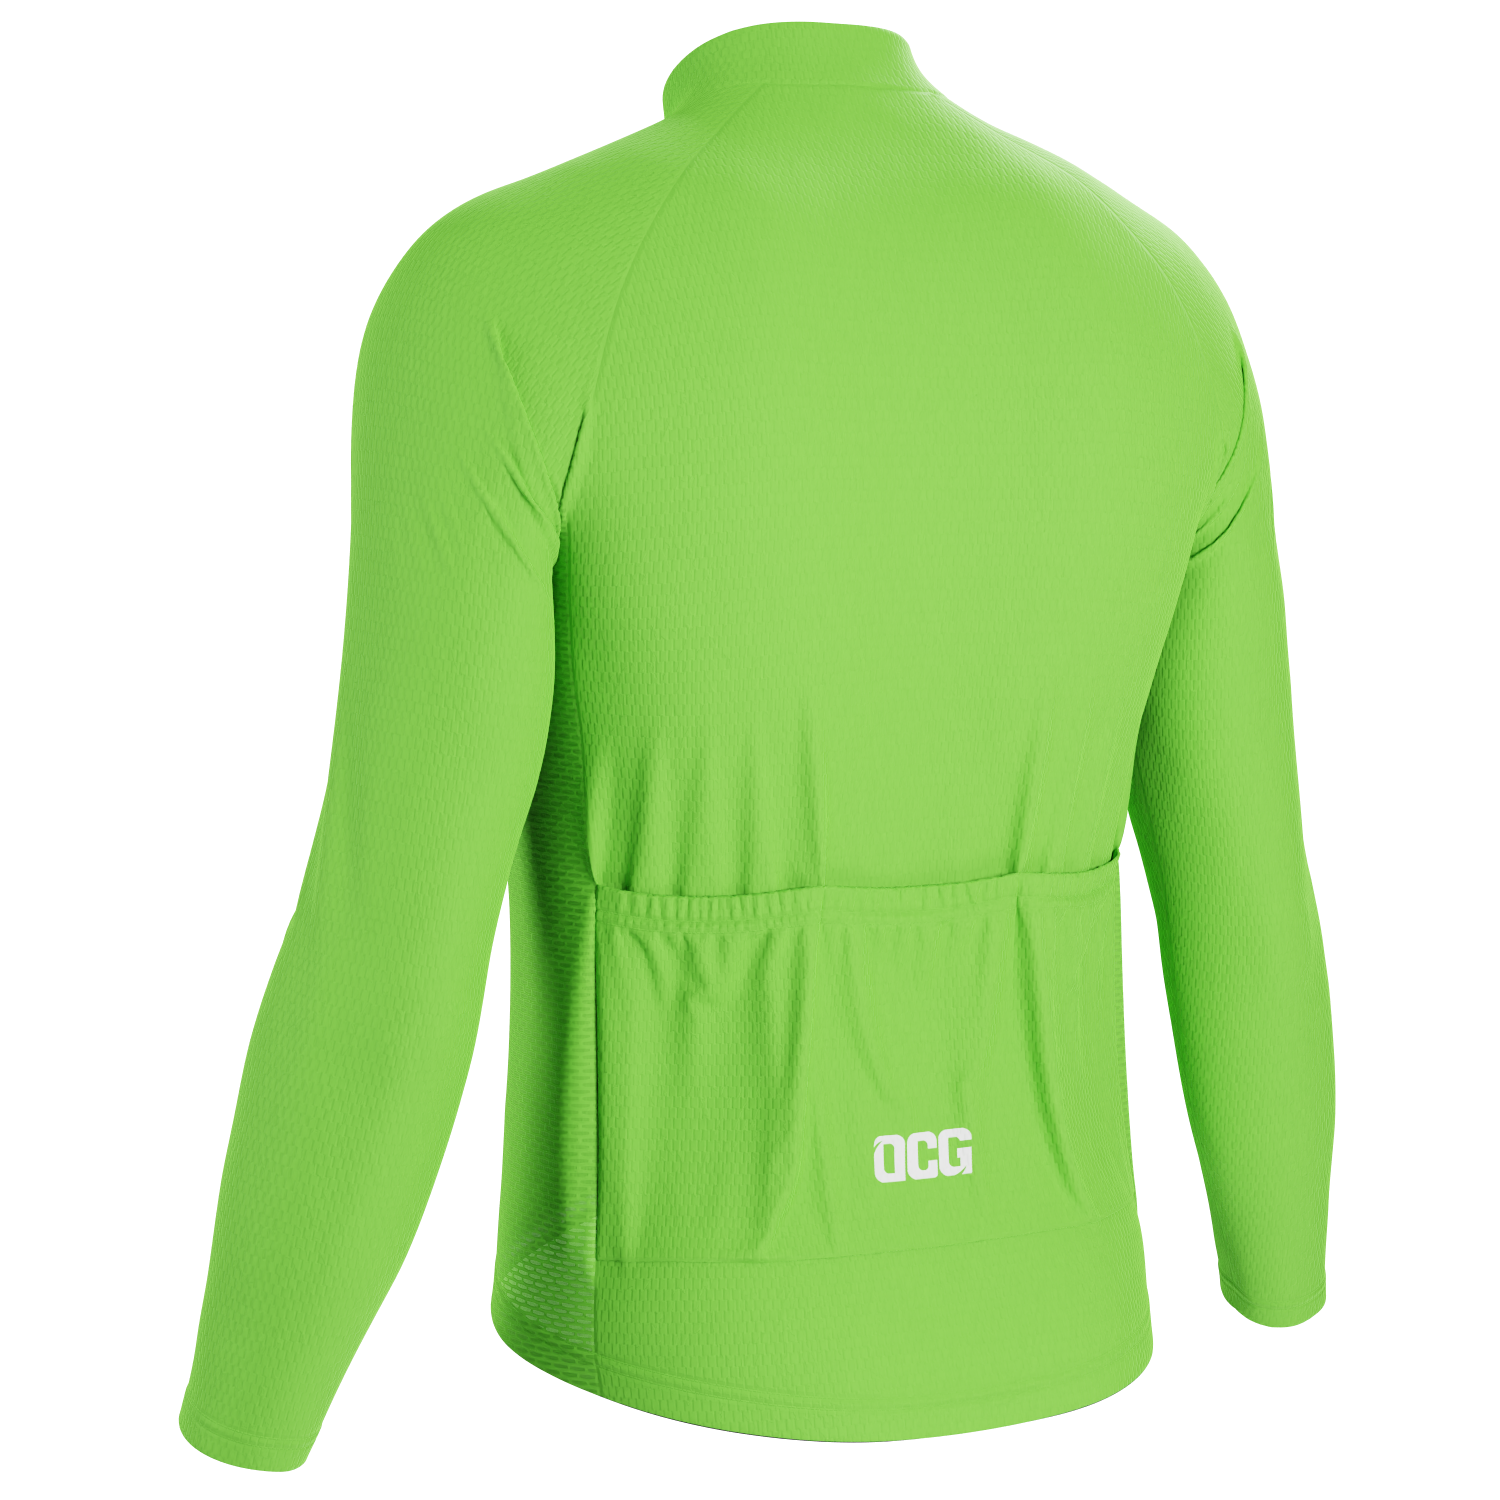 Men's Evolution of Man in Green Long Sleeve Cycling Jersey